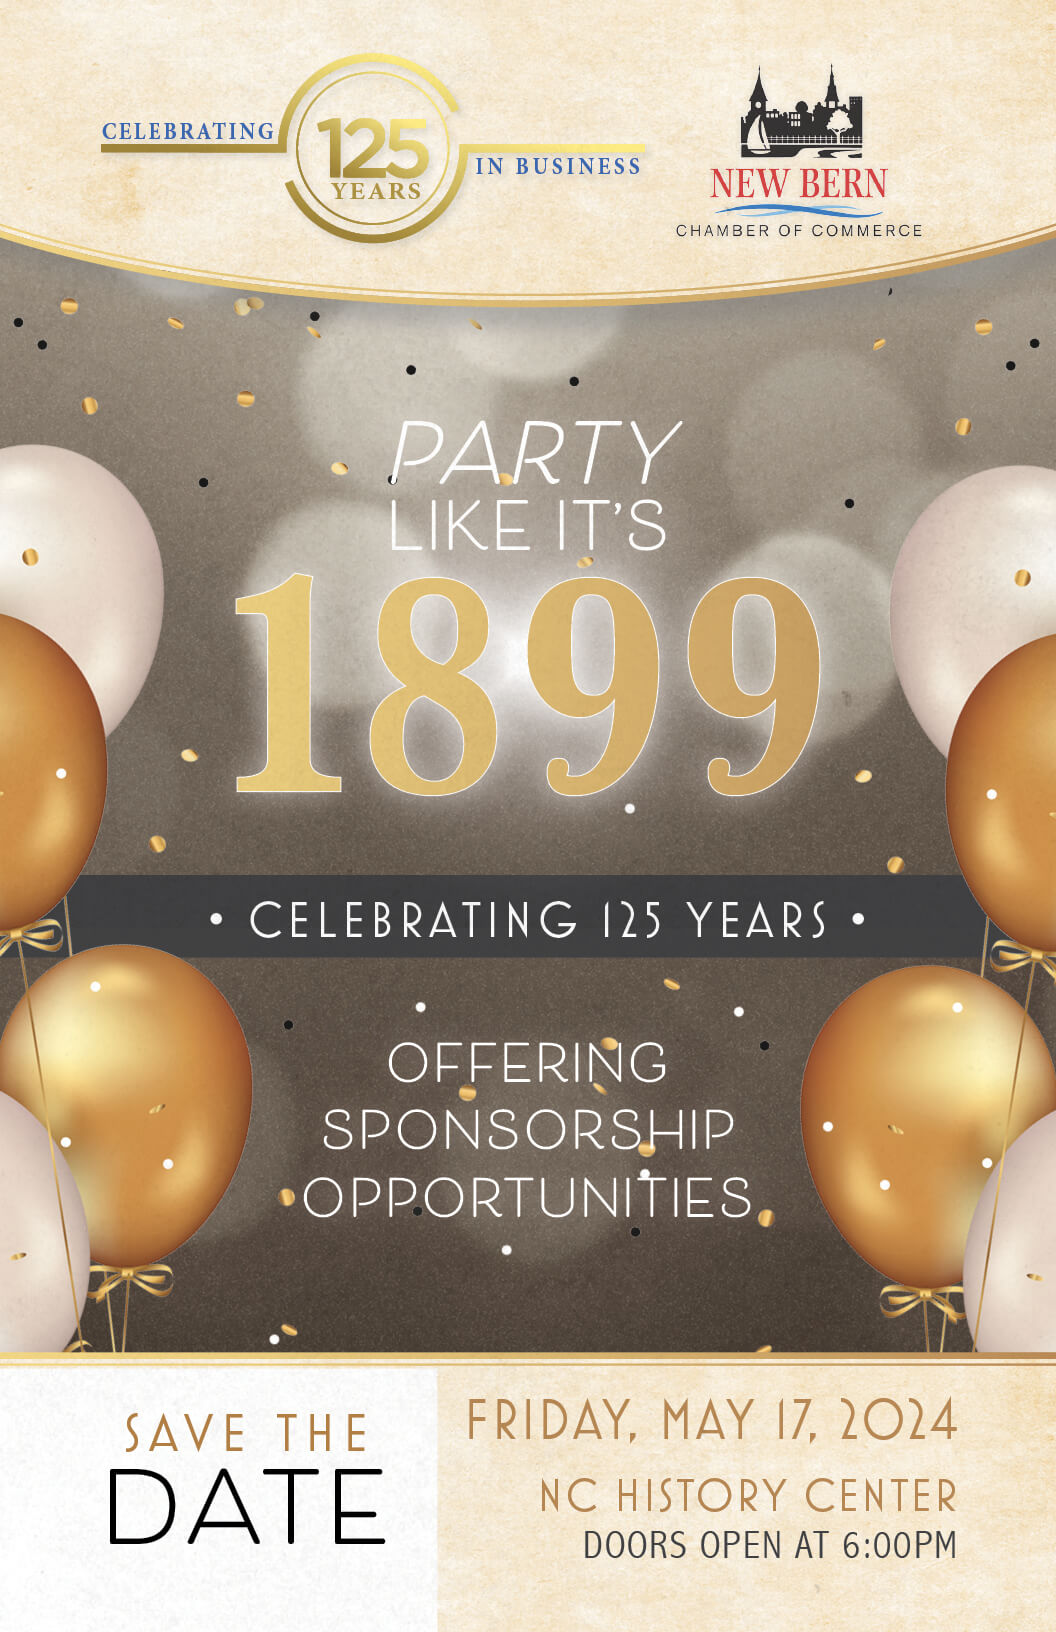 Party Like Its 1899